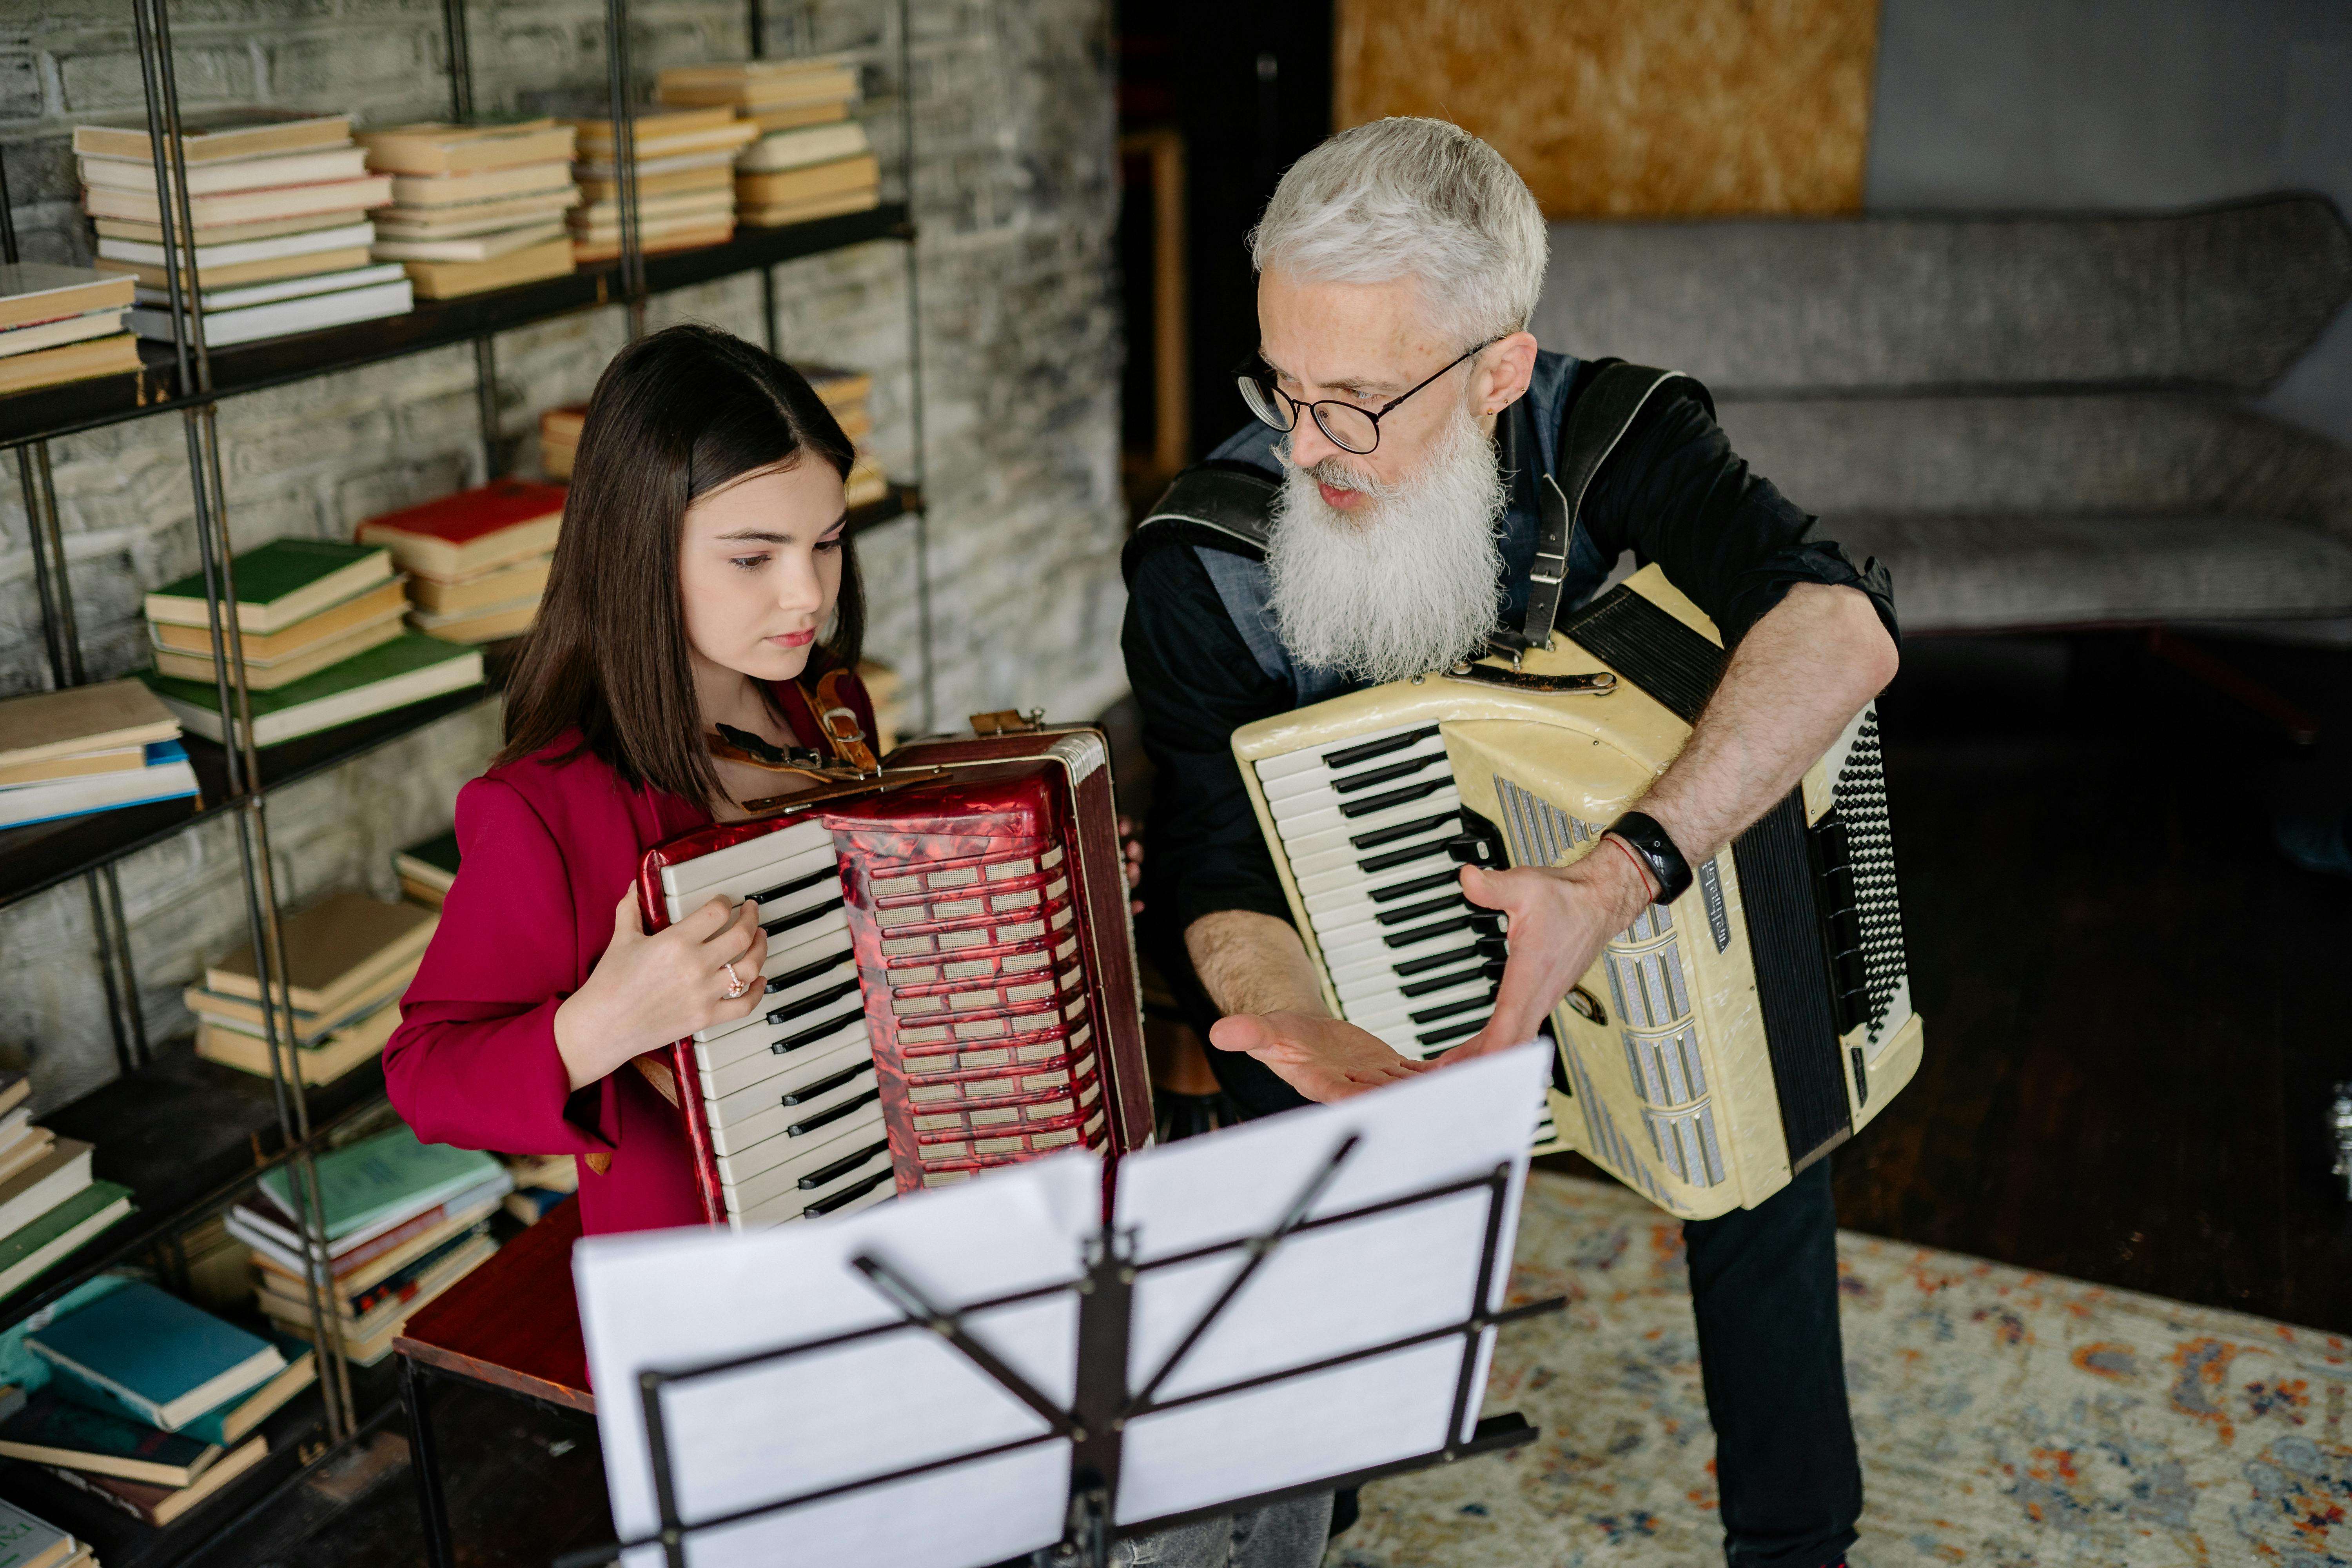 a bearded man talking to the girl while holding an accordion